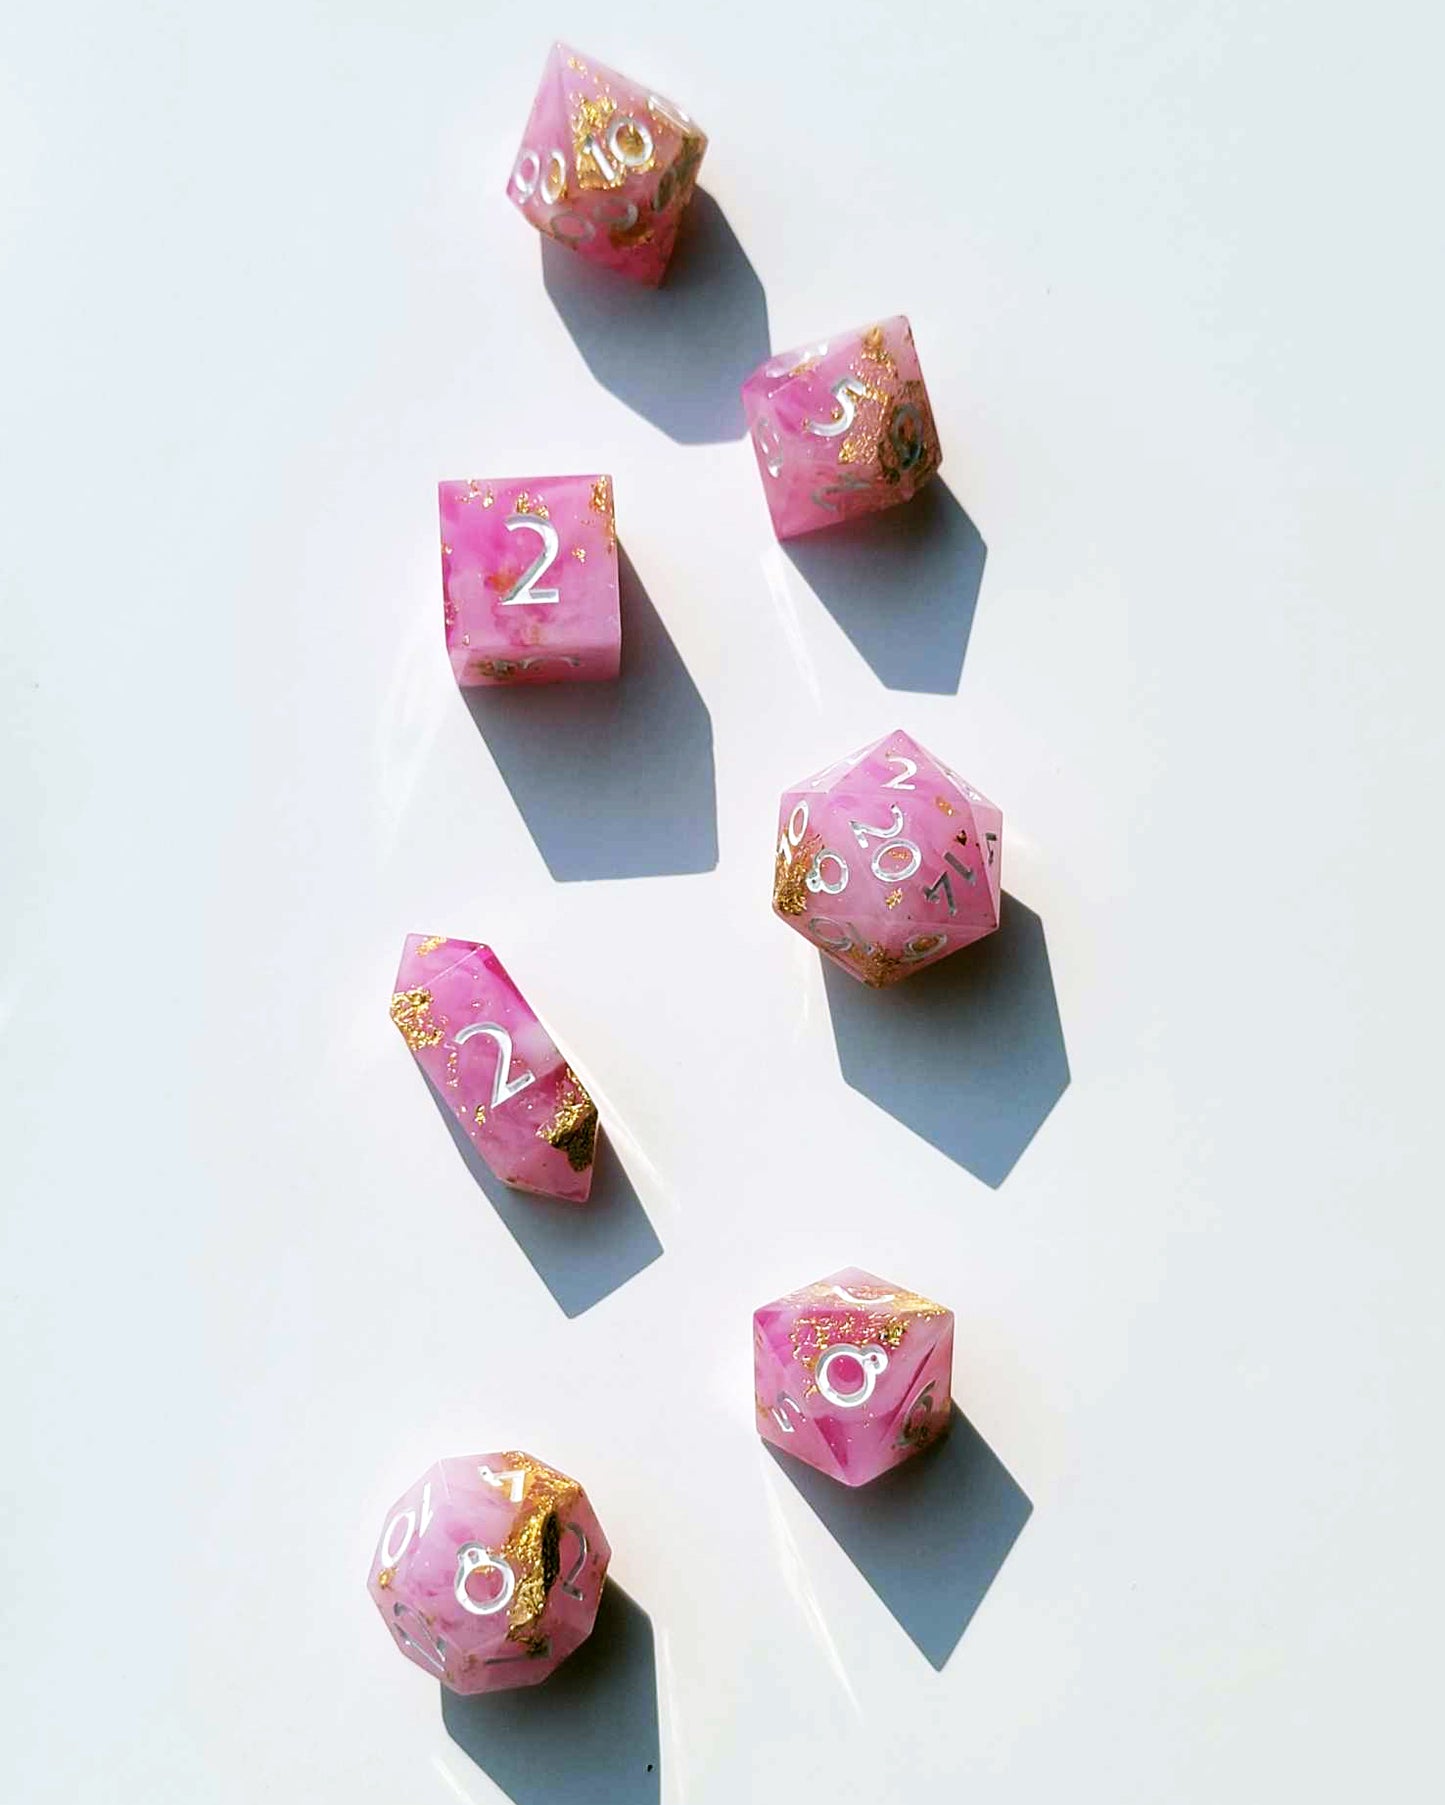 Rose Quartz Dreams - 7 Piece handmade D&D Dice| Hand Crafted Dungeons and Dragons Dice